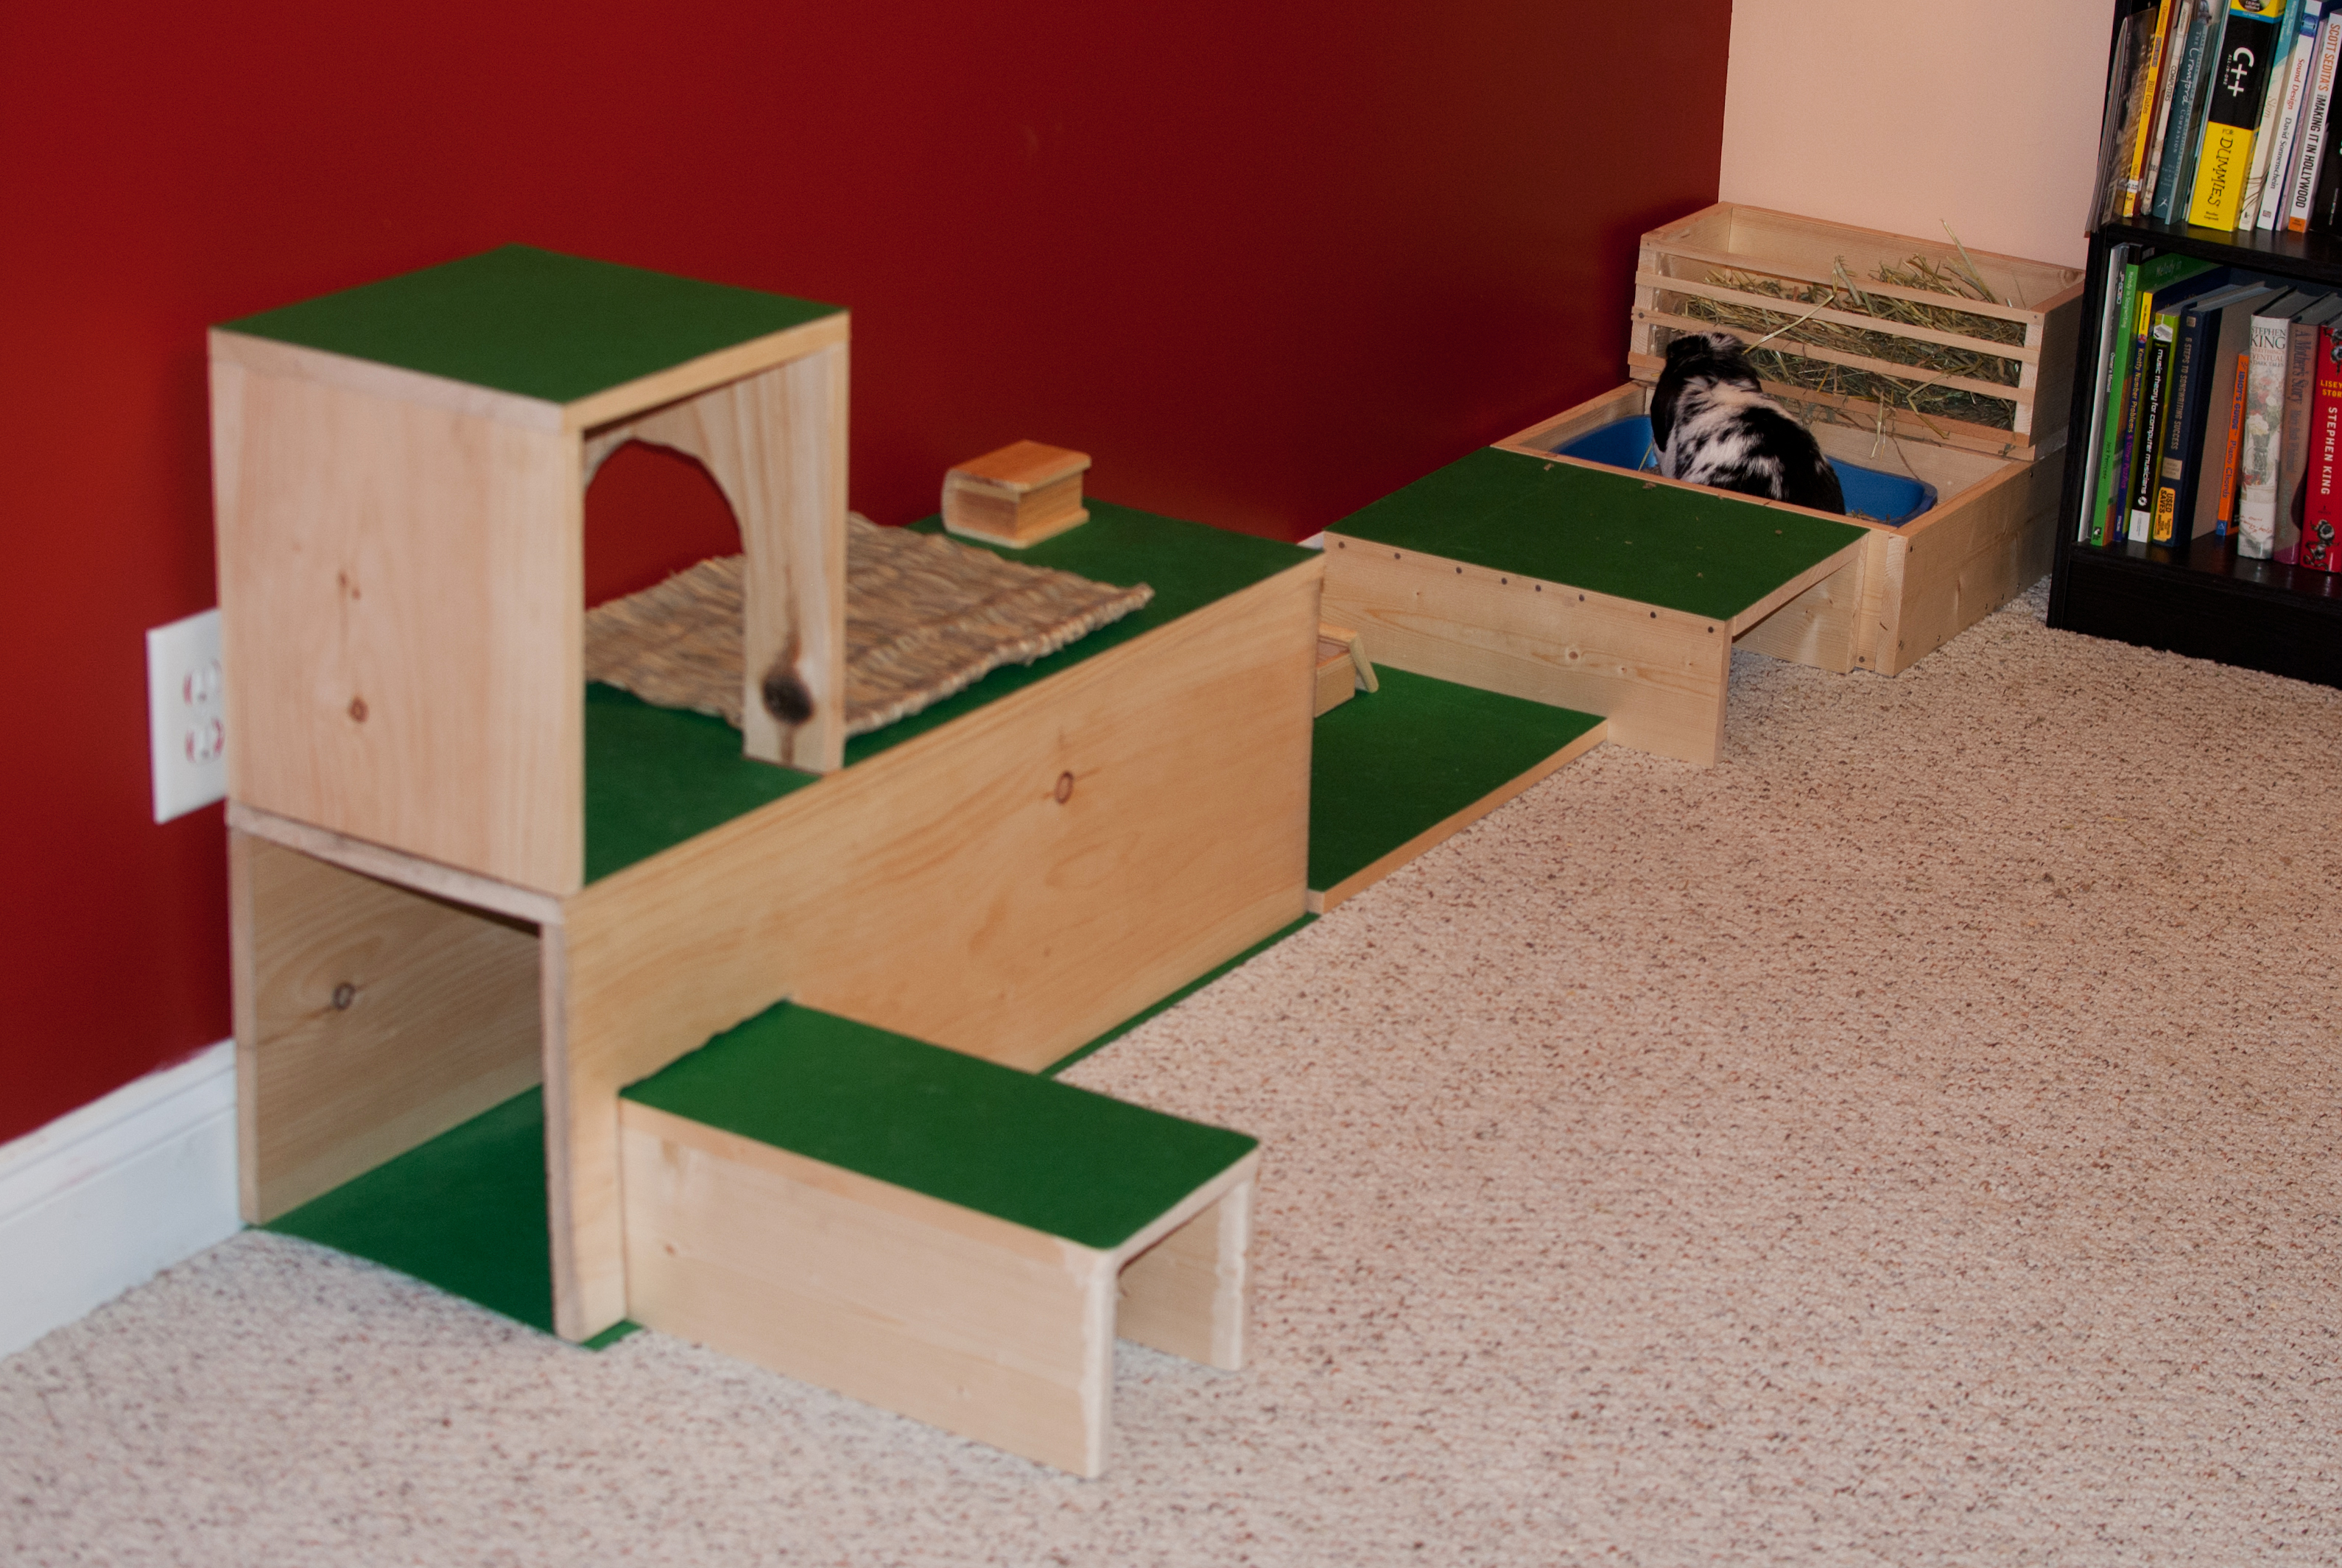 Bunny's current castle made out of wood and felt (to prevent slipping).